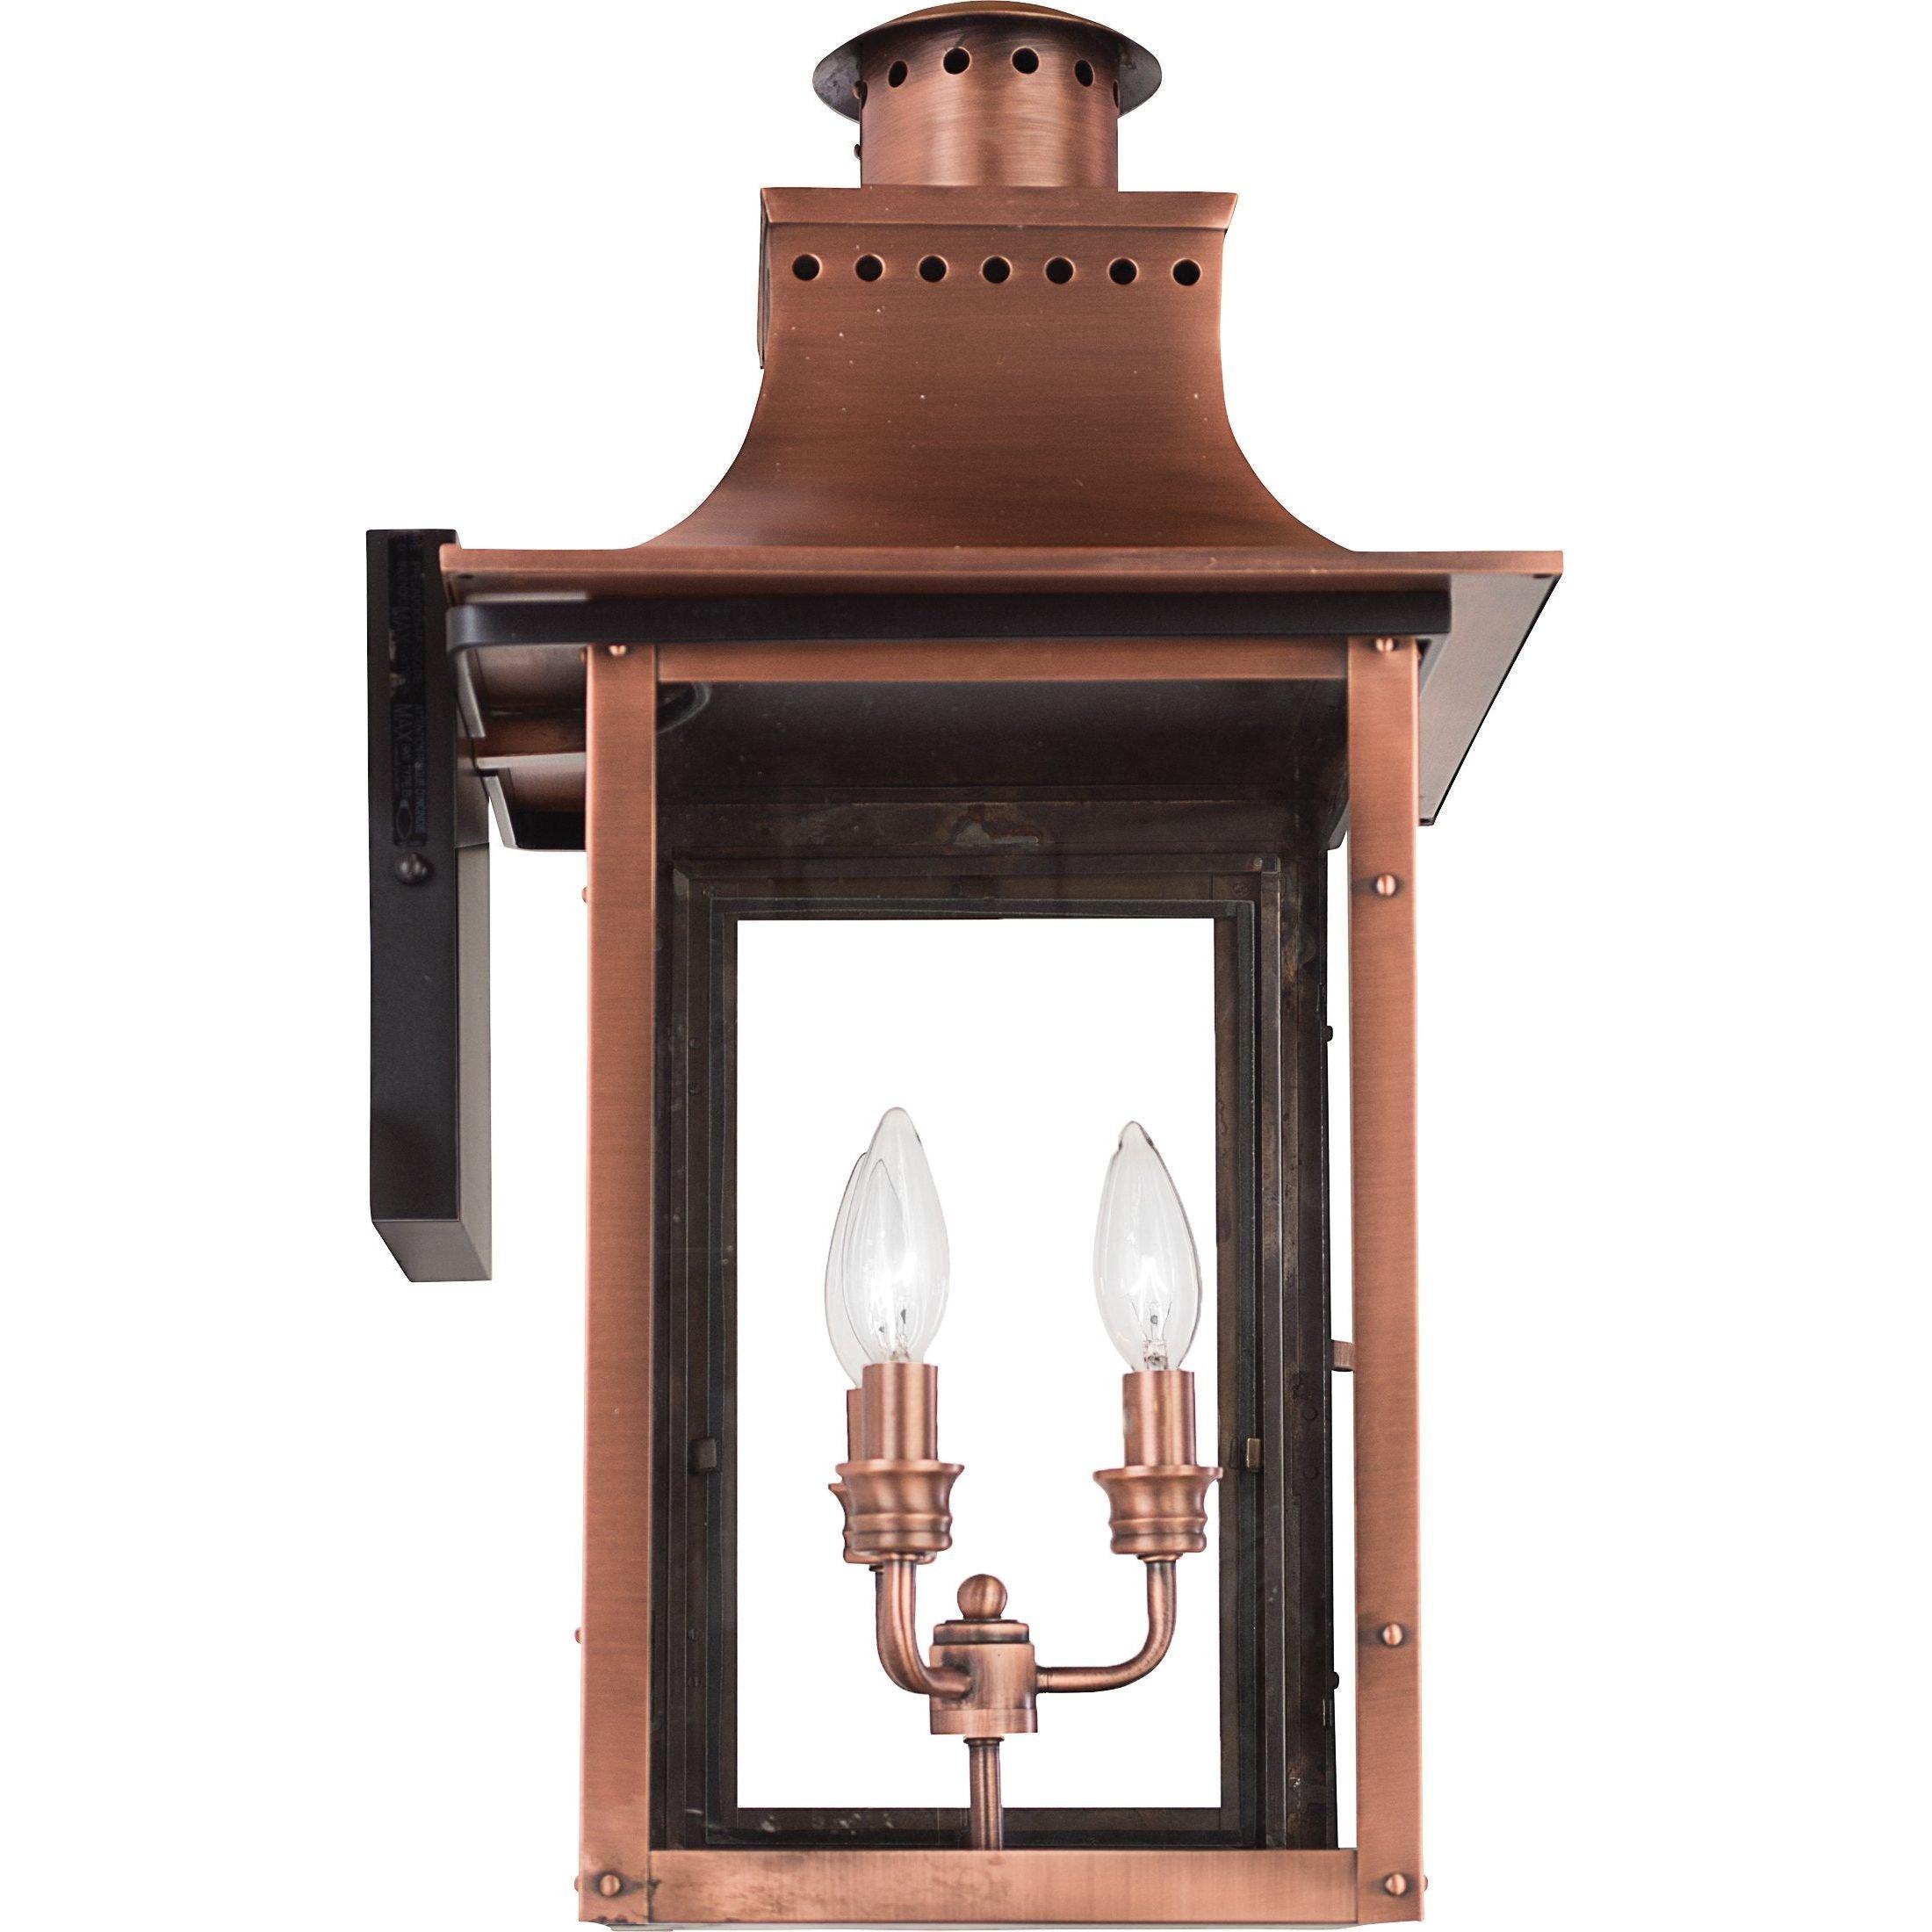 Quoizel - Chalmers Outdoor Wall Light - Lights Canada